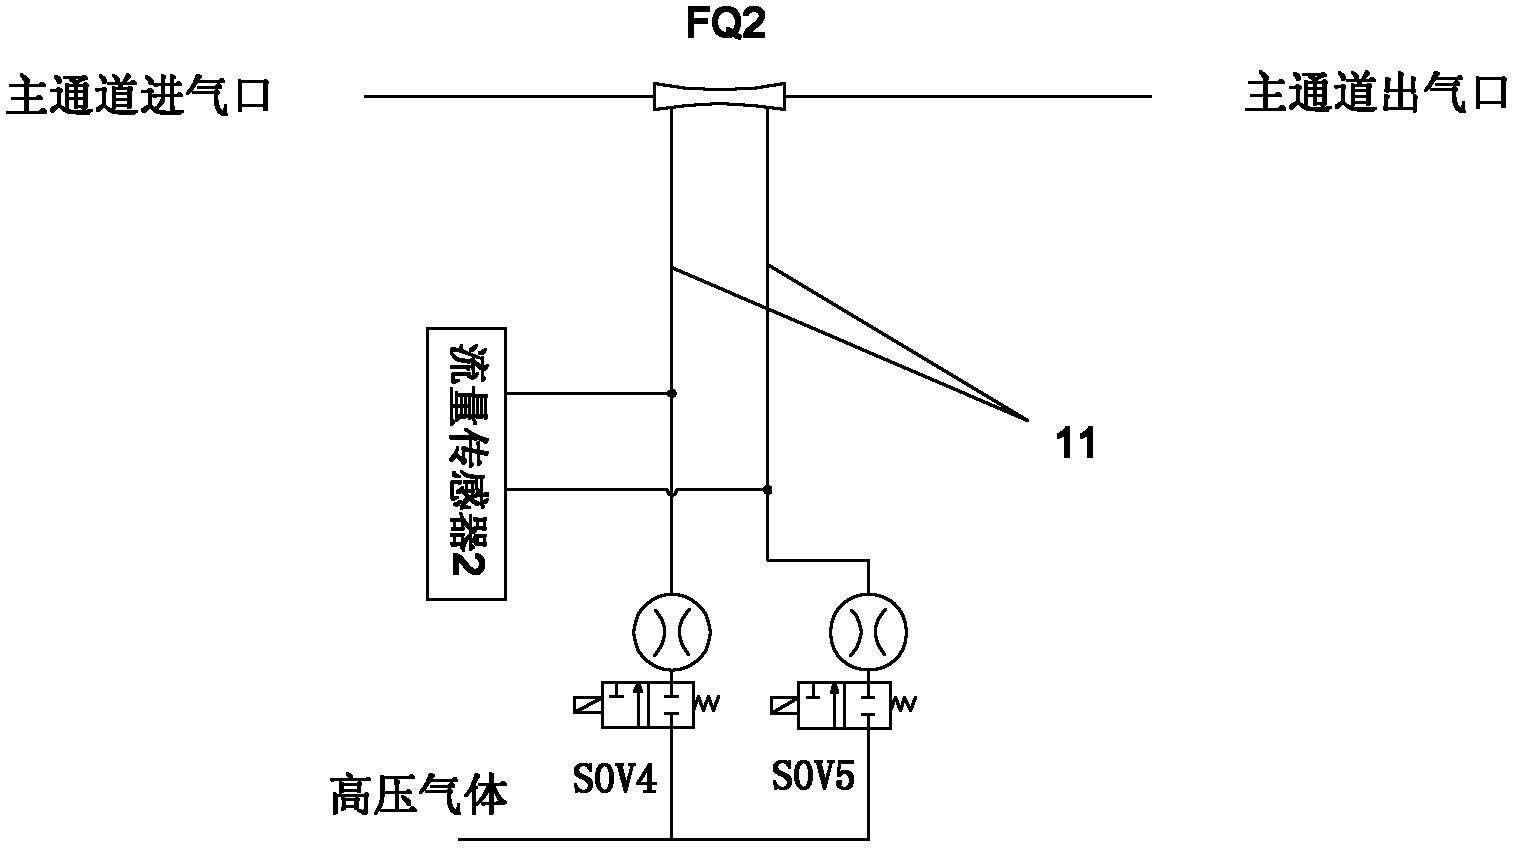 Water removal system of flow sensor